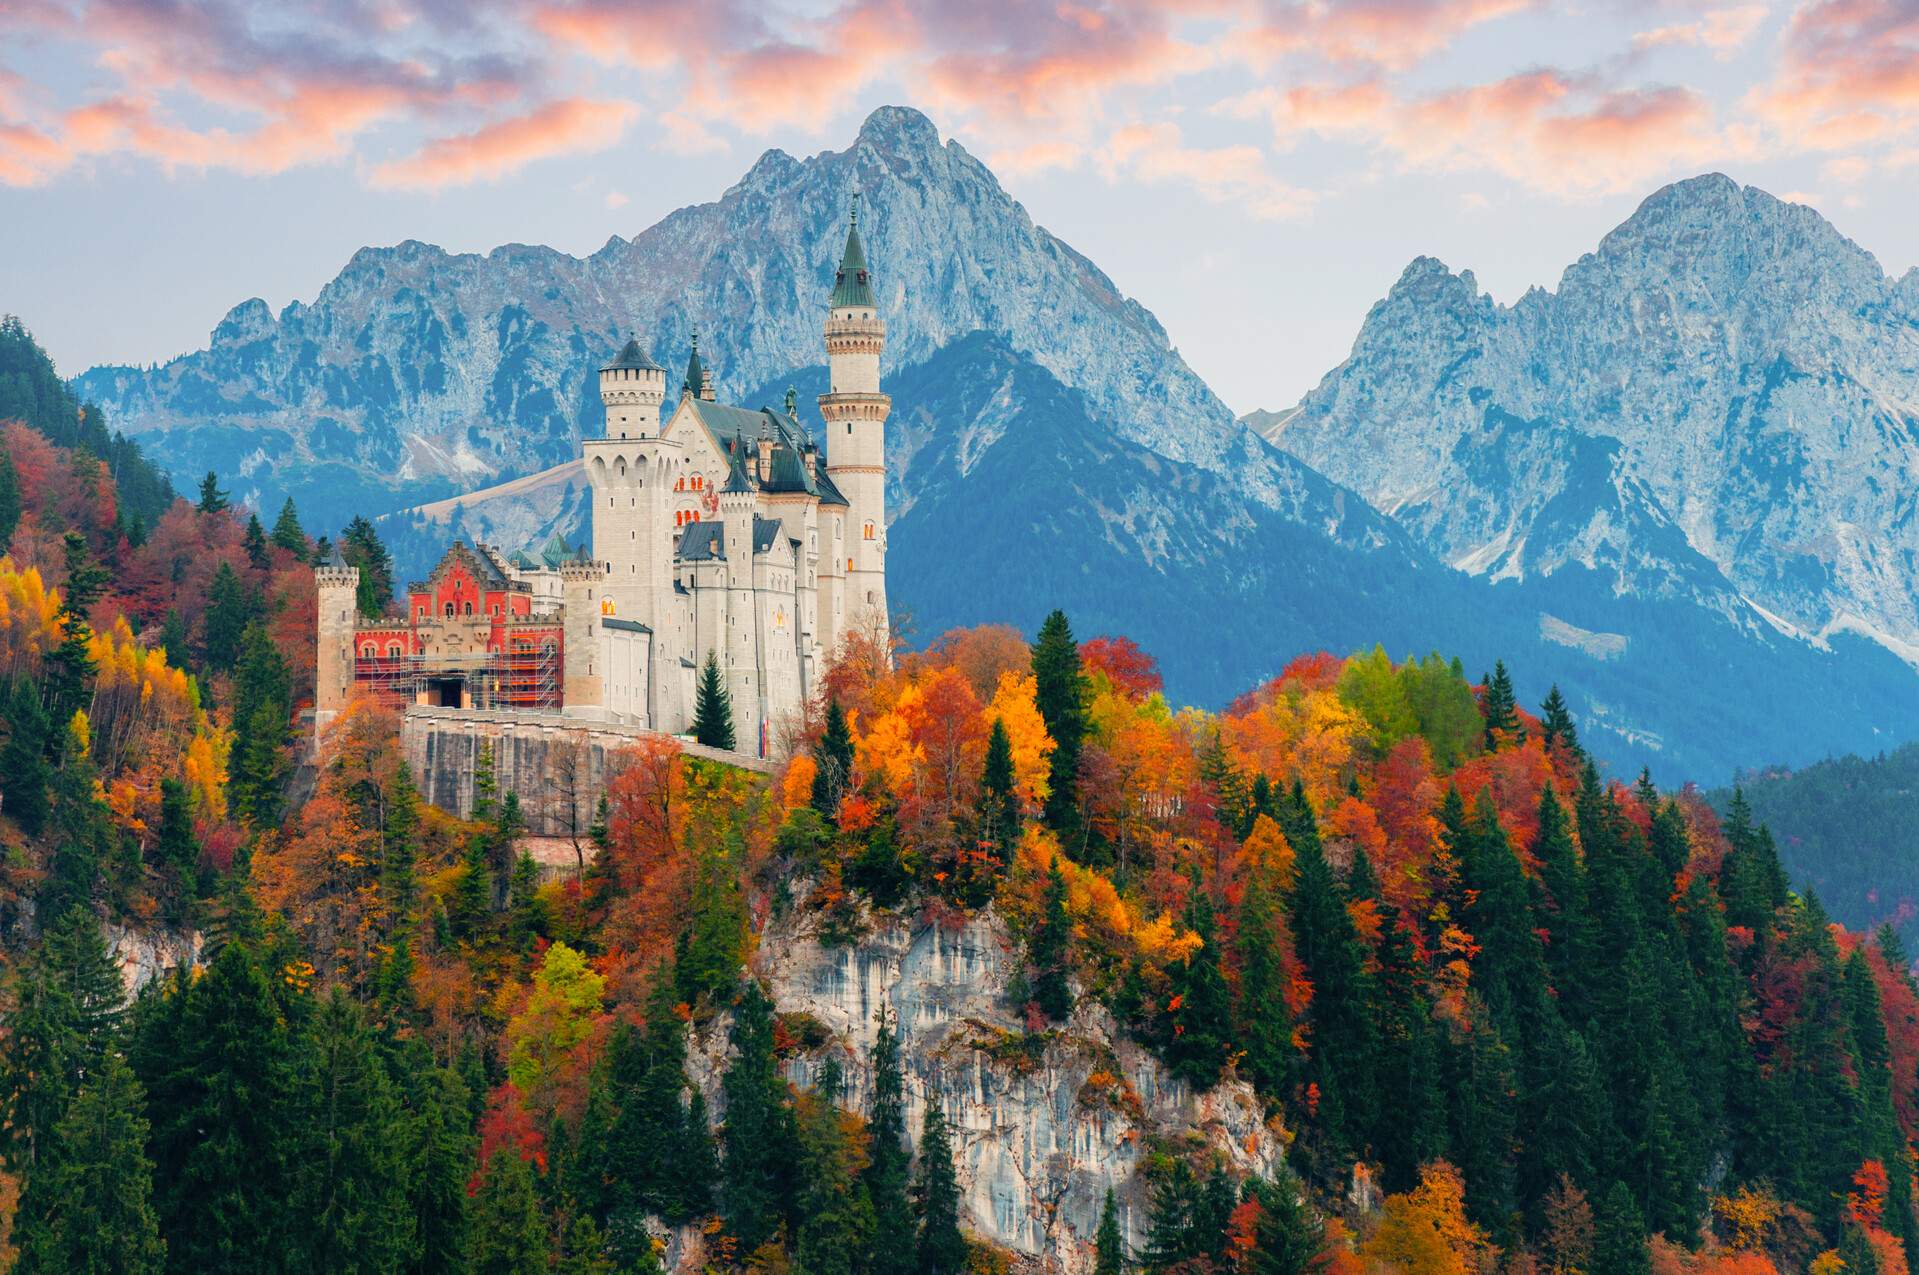 A medieval white castle with blue turrets on a rugged hill surrounded by trees with vivid autumn colours and a snow-capped mountain range in the background.